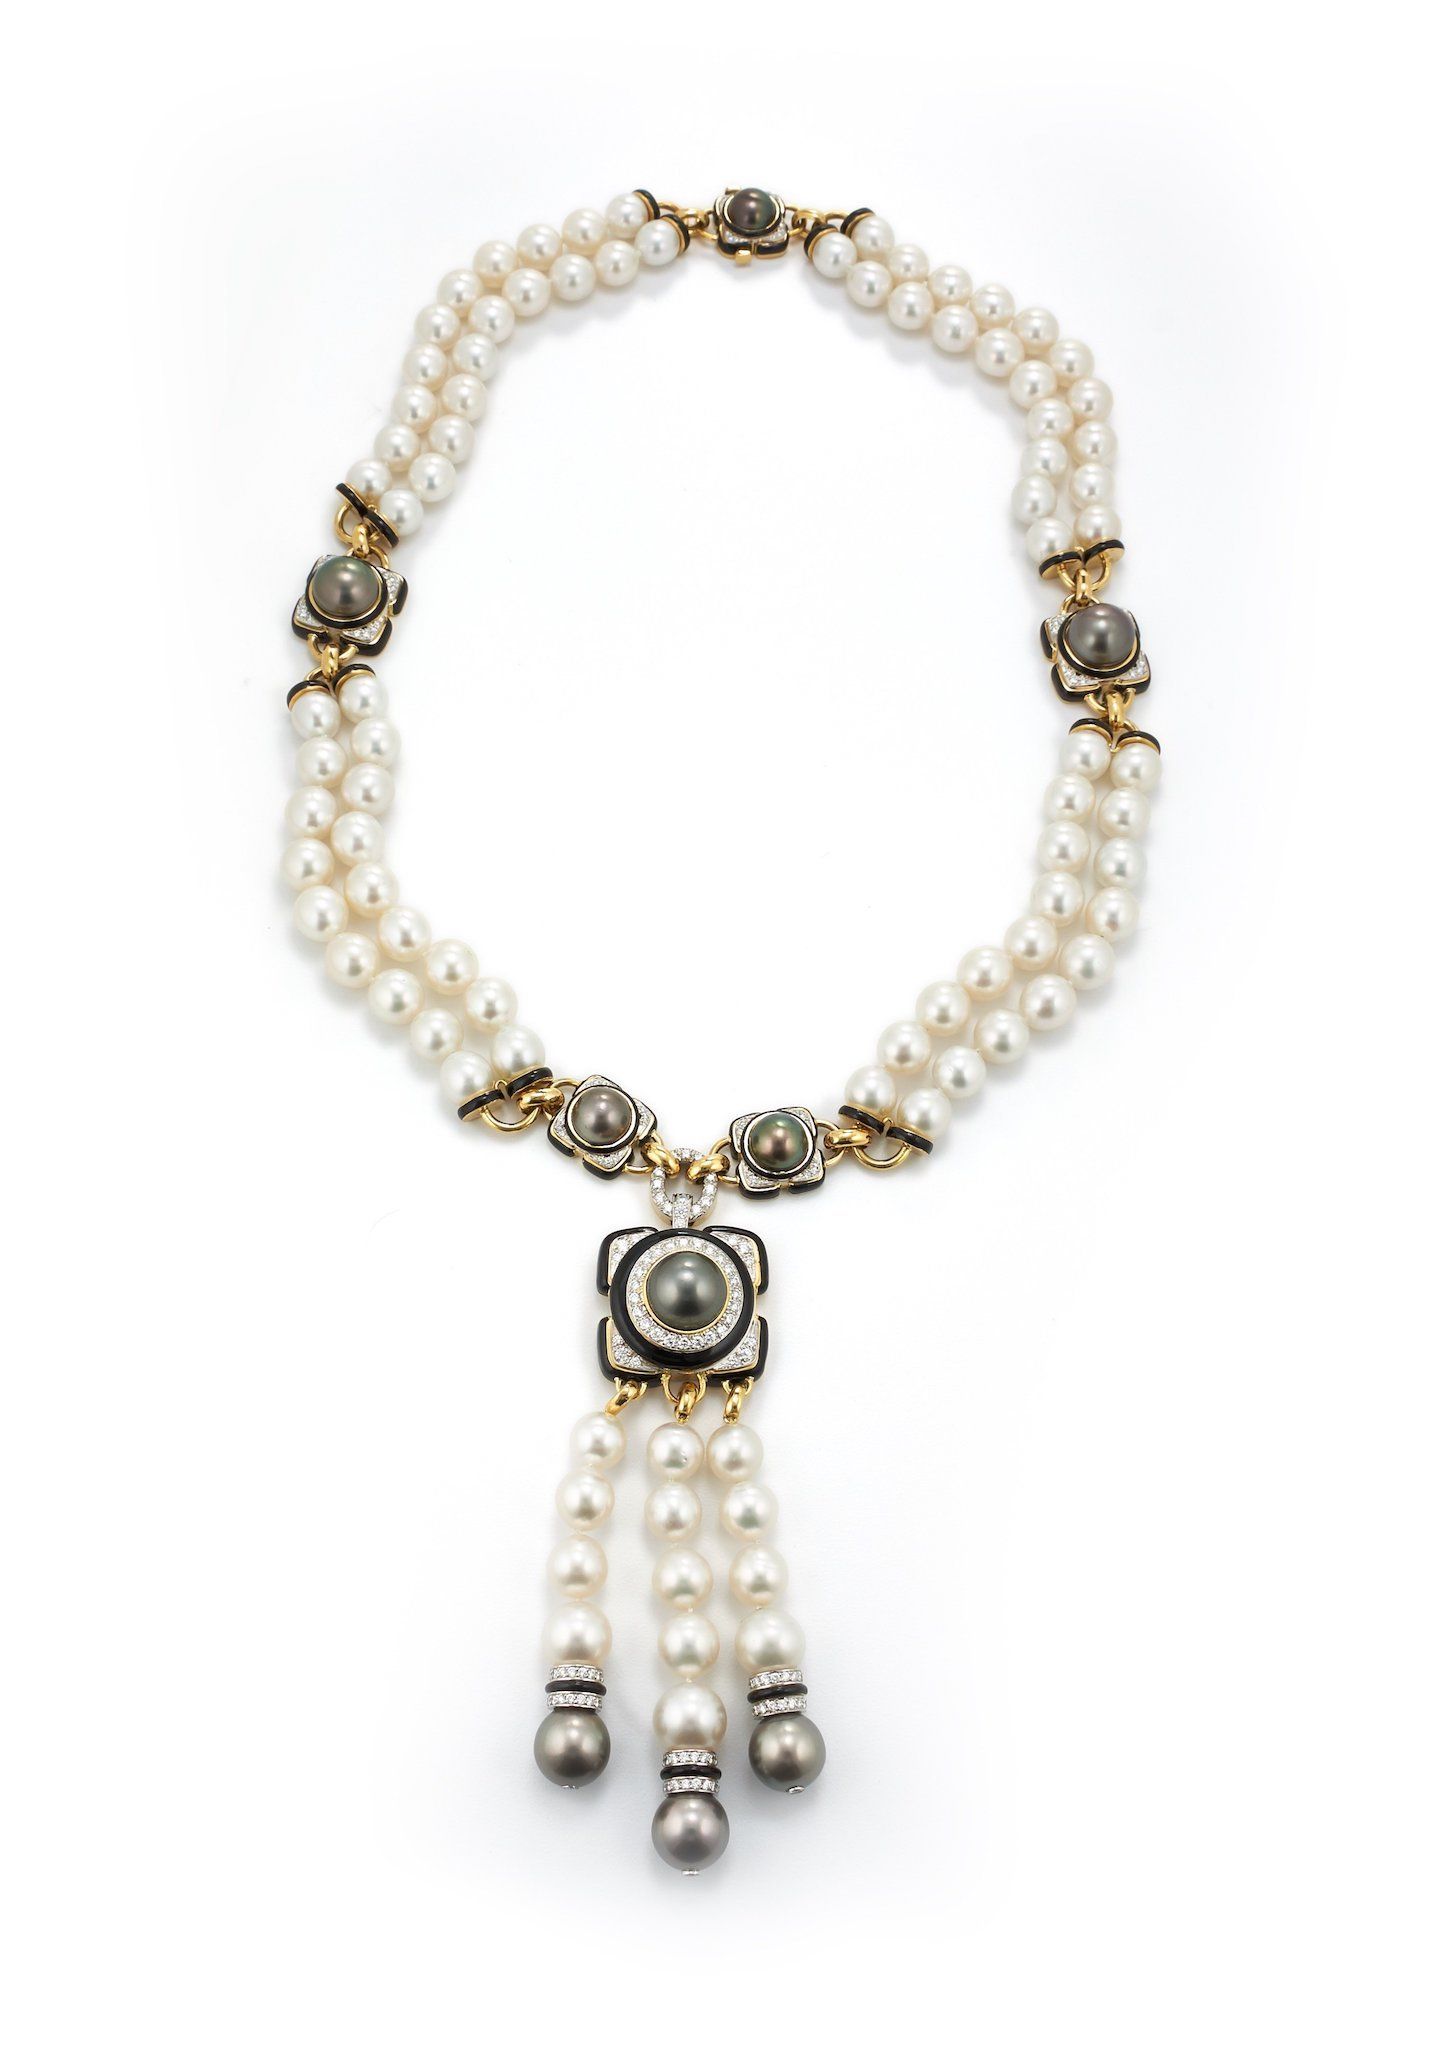 Pearl, Enamel, and Diamond Necklace